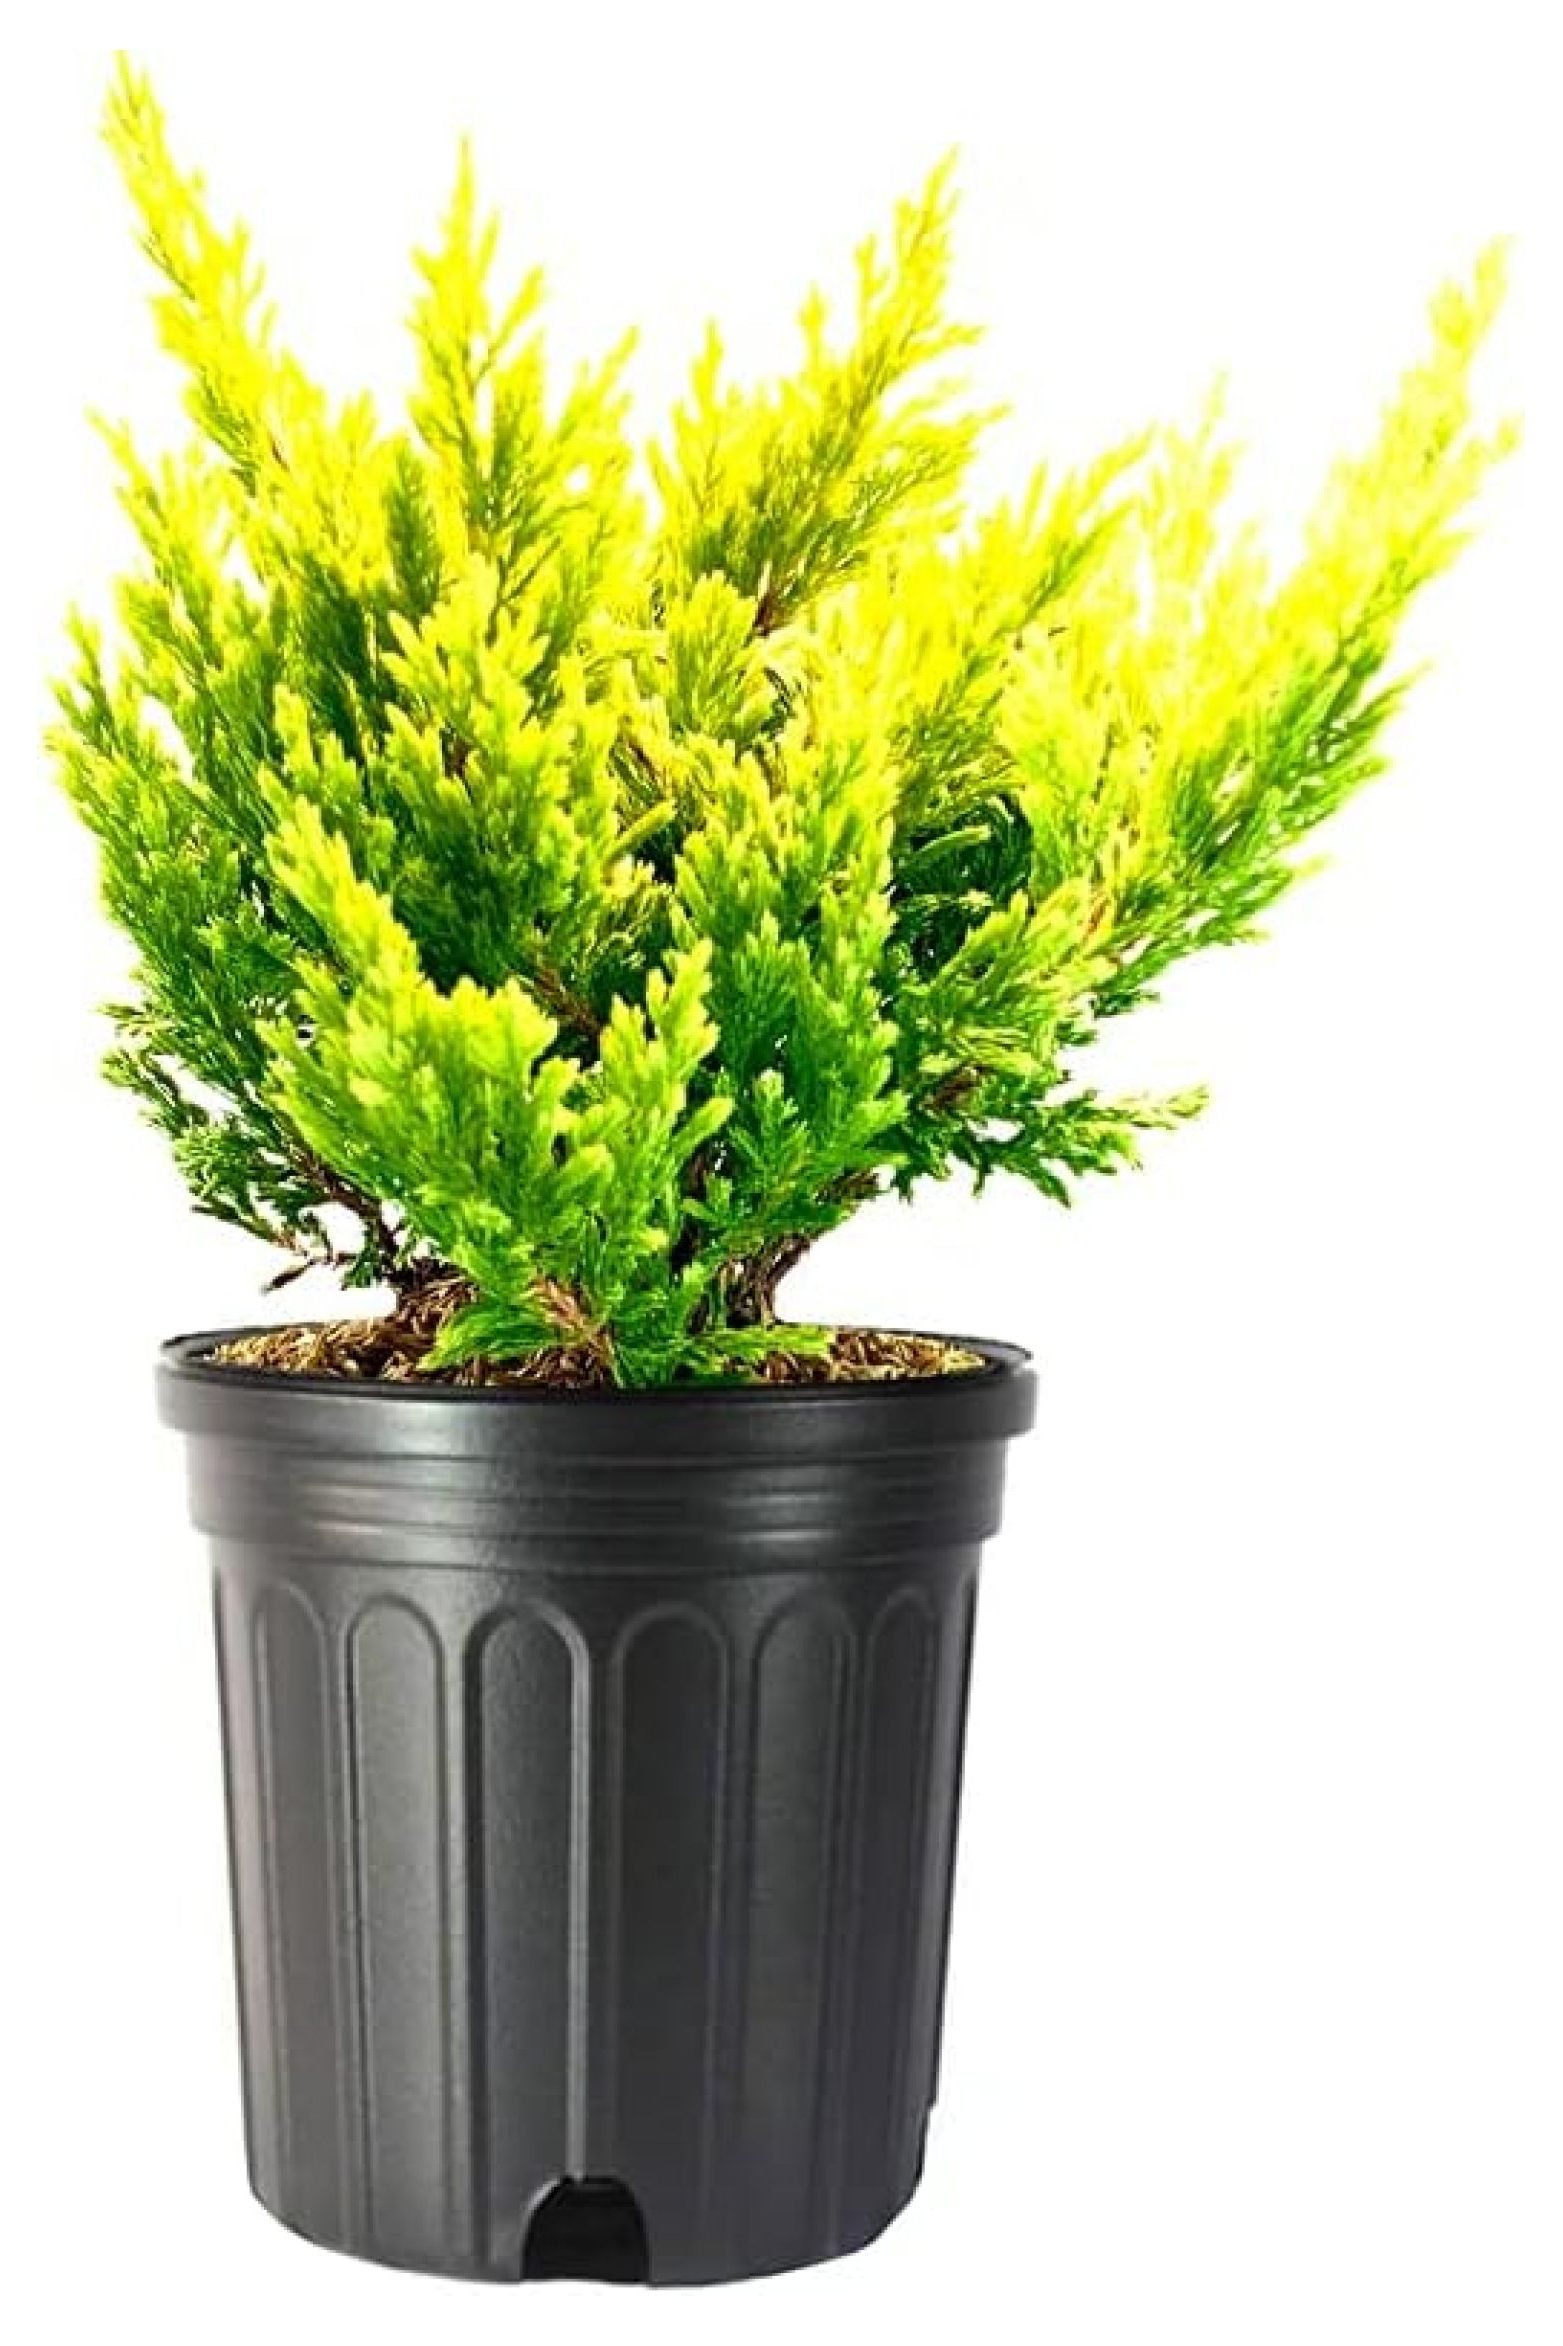 Lime Glow Juniper | 2 Live Gallon Size Plants | Juniperus Horizontalis | Cold Hardy Drought Tolerant Groundcover - image 1 of 6